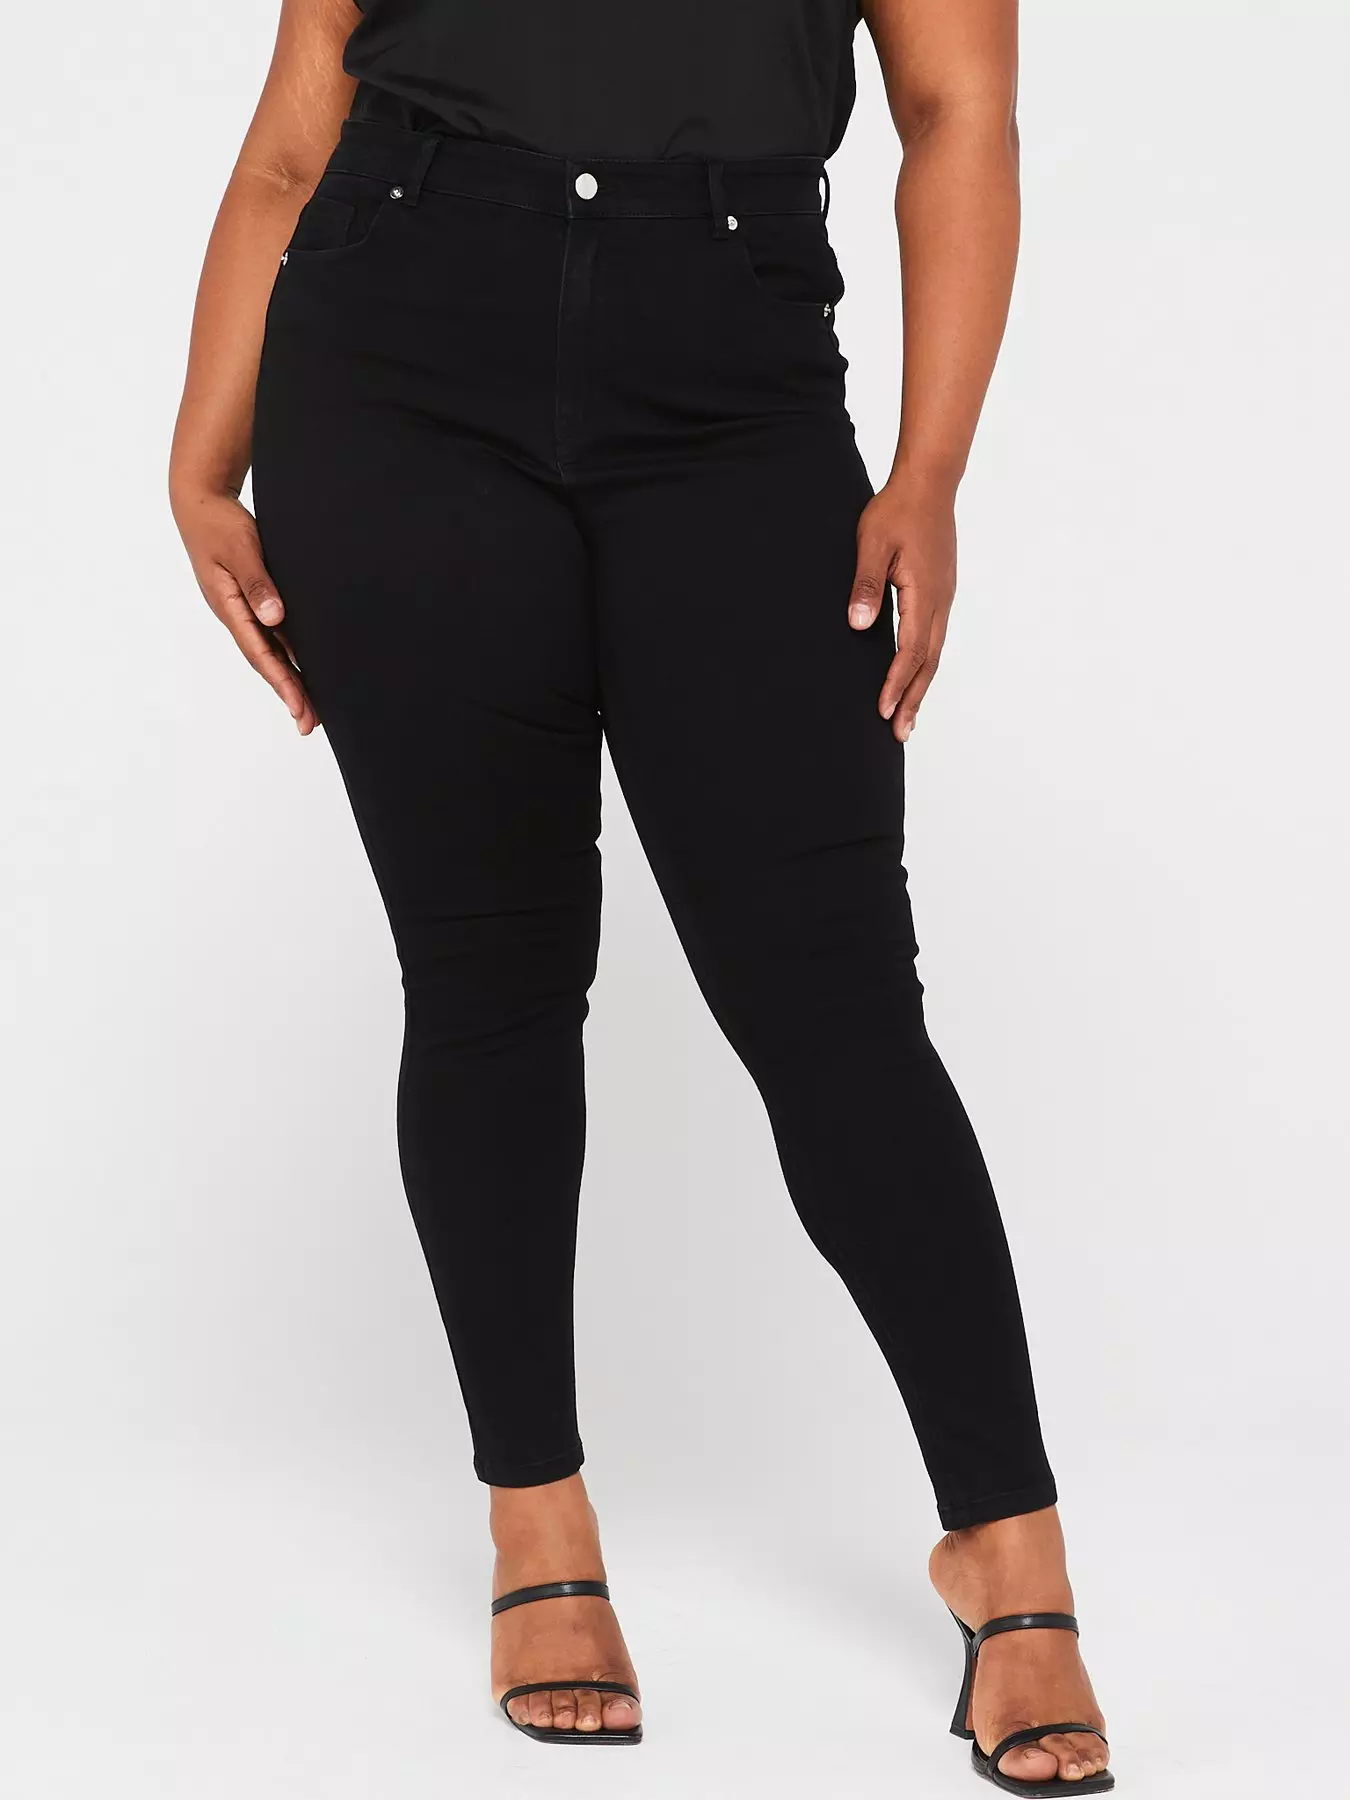 Model is 5'8.5 and wears Plus size 16. With all the stretch of a legging  but the style points of a pair of jea…